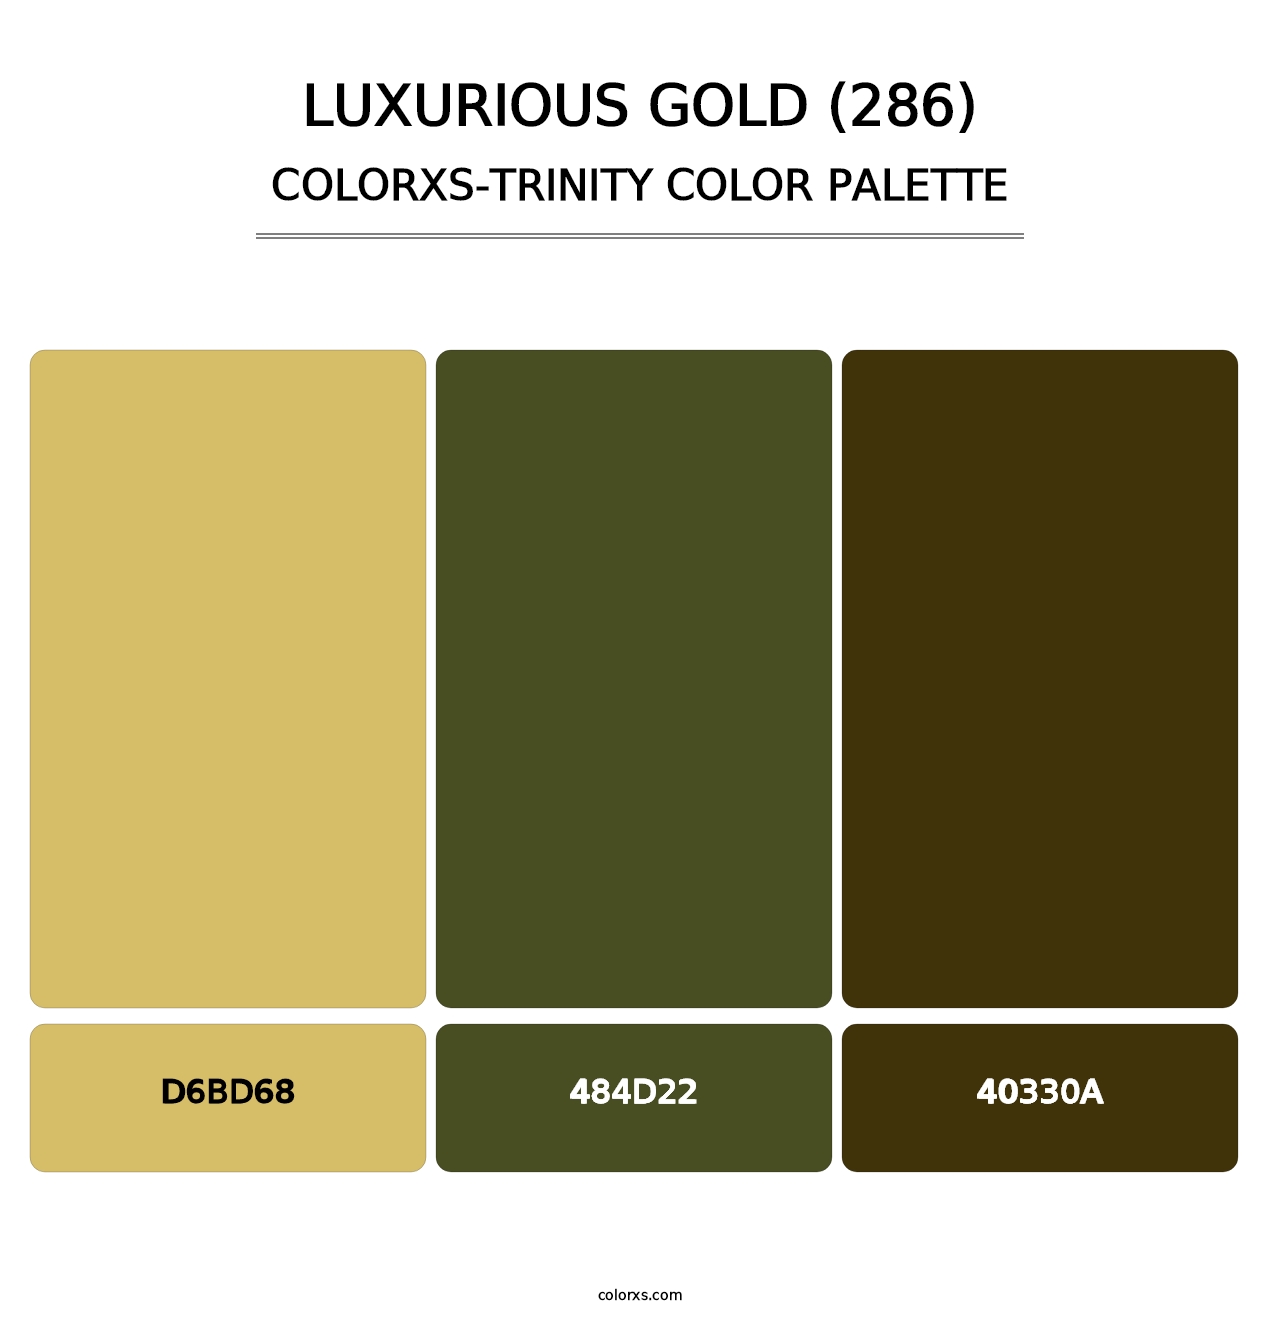 Luxurious Gold (286) - Colorxs Trinity Palette